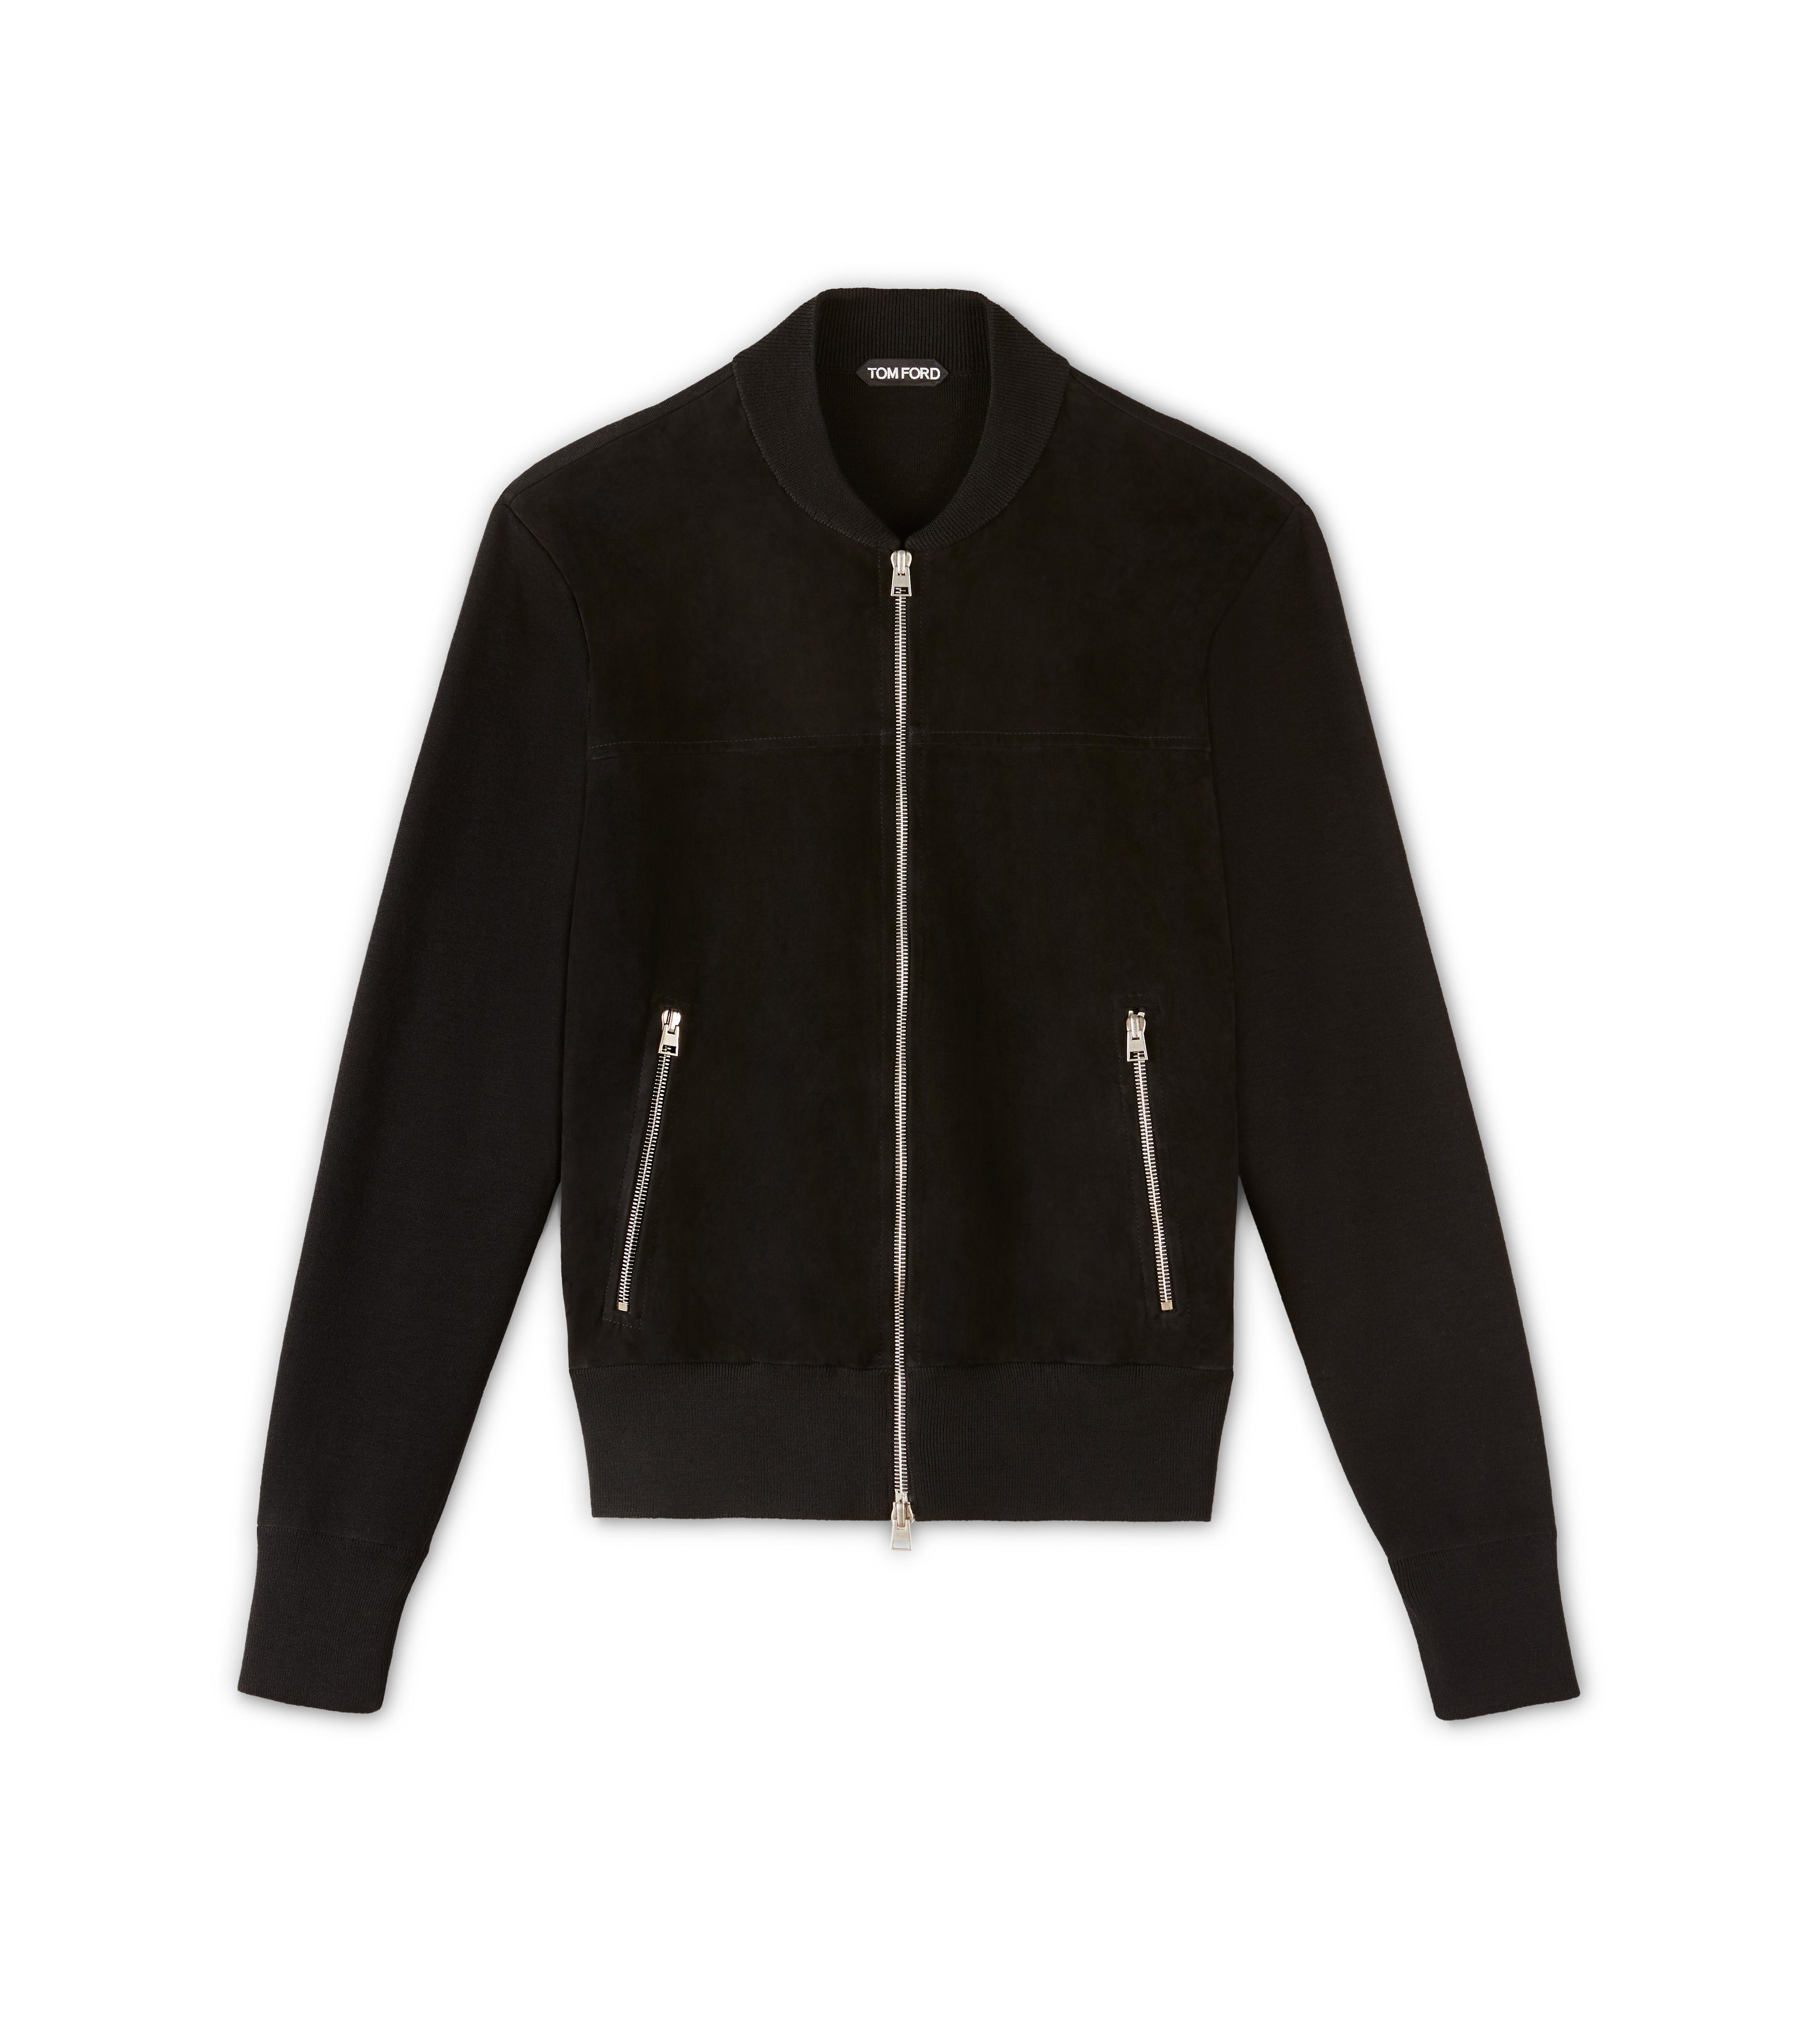 Tom Ford FULL ZIP BOMBER JACKET WITH SUEDE FRONT - Men | TomFord.com